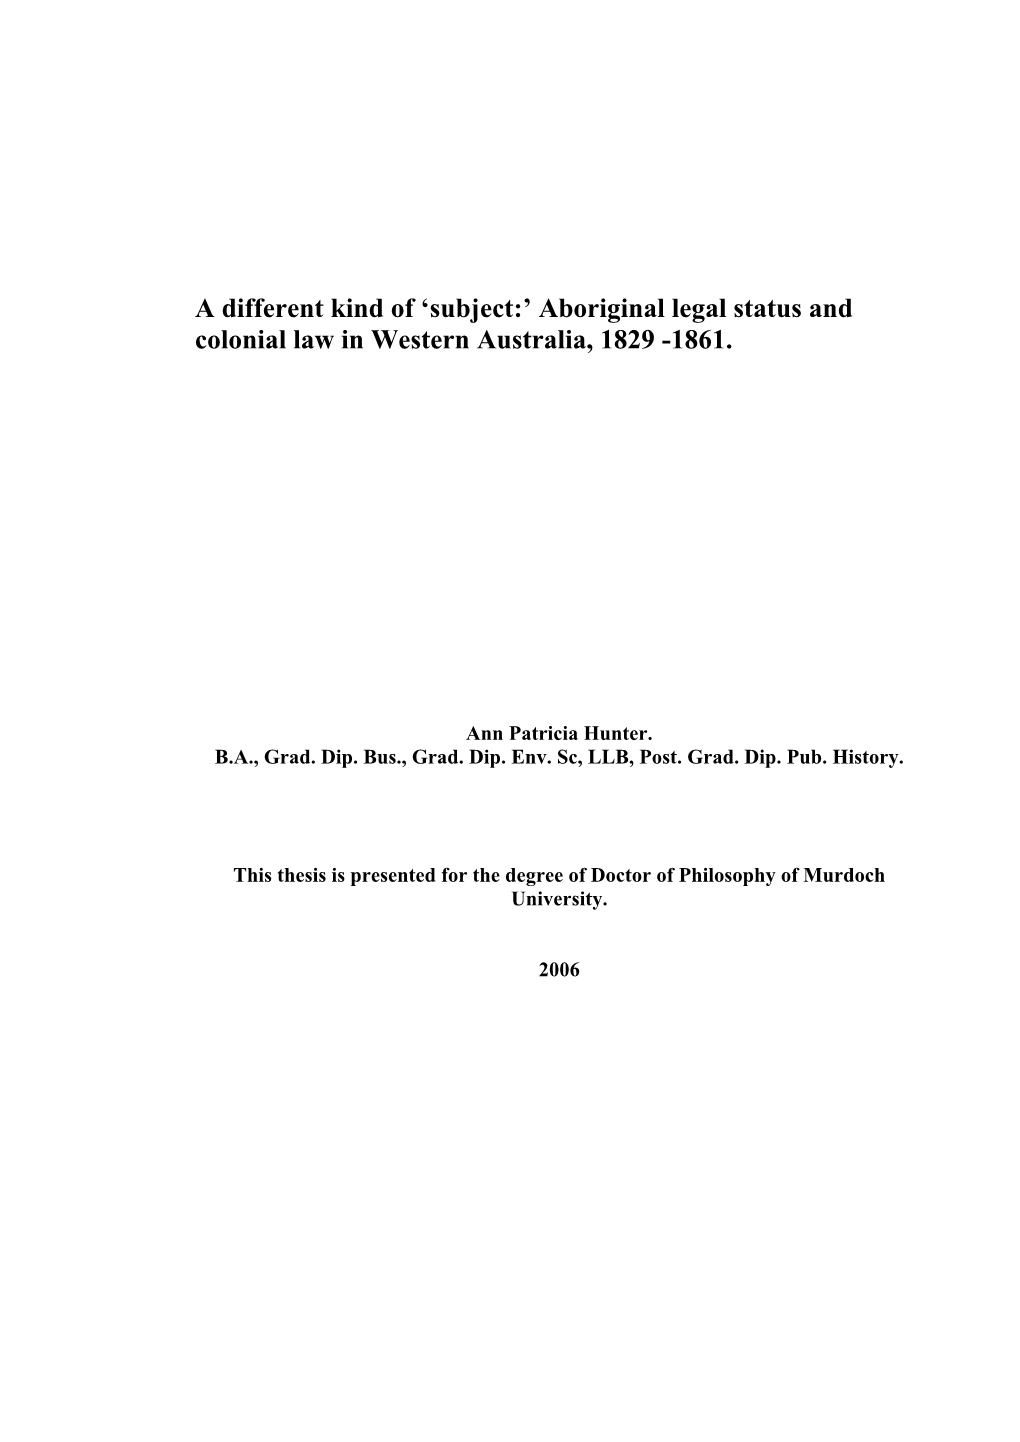 Aboriginal Legal Status and Colonial Law in Western Australia, 1829 -1861